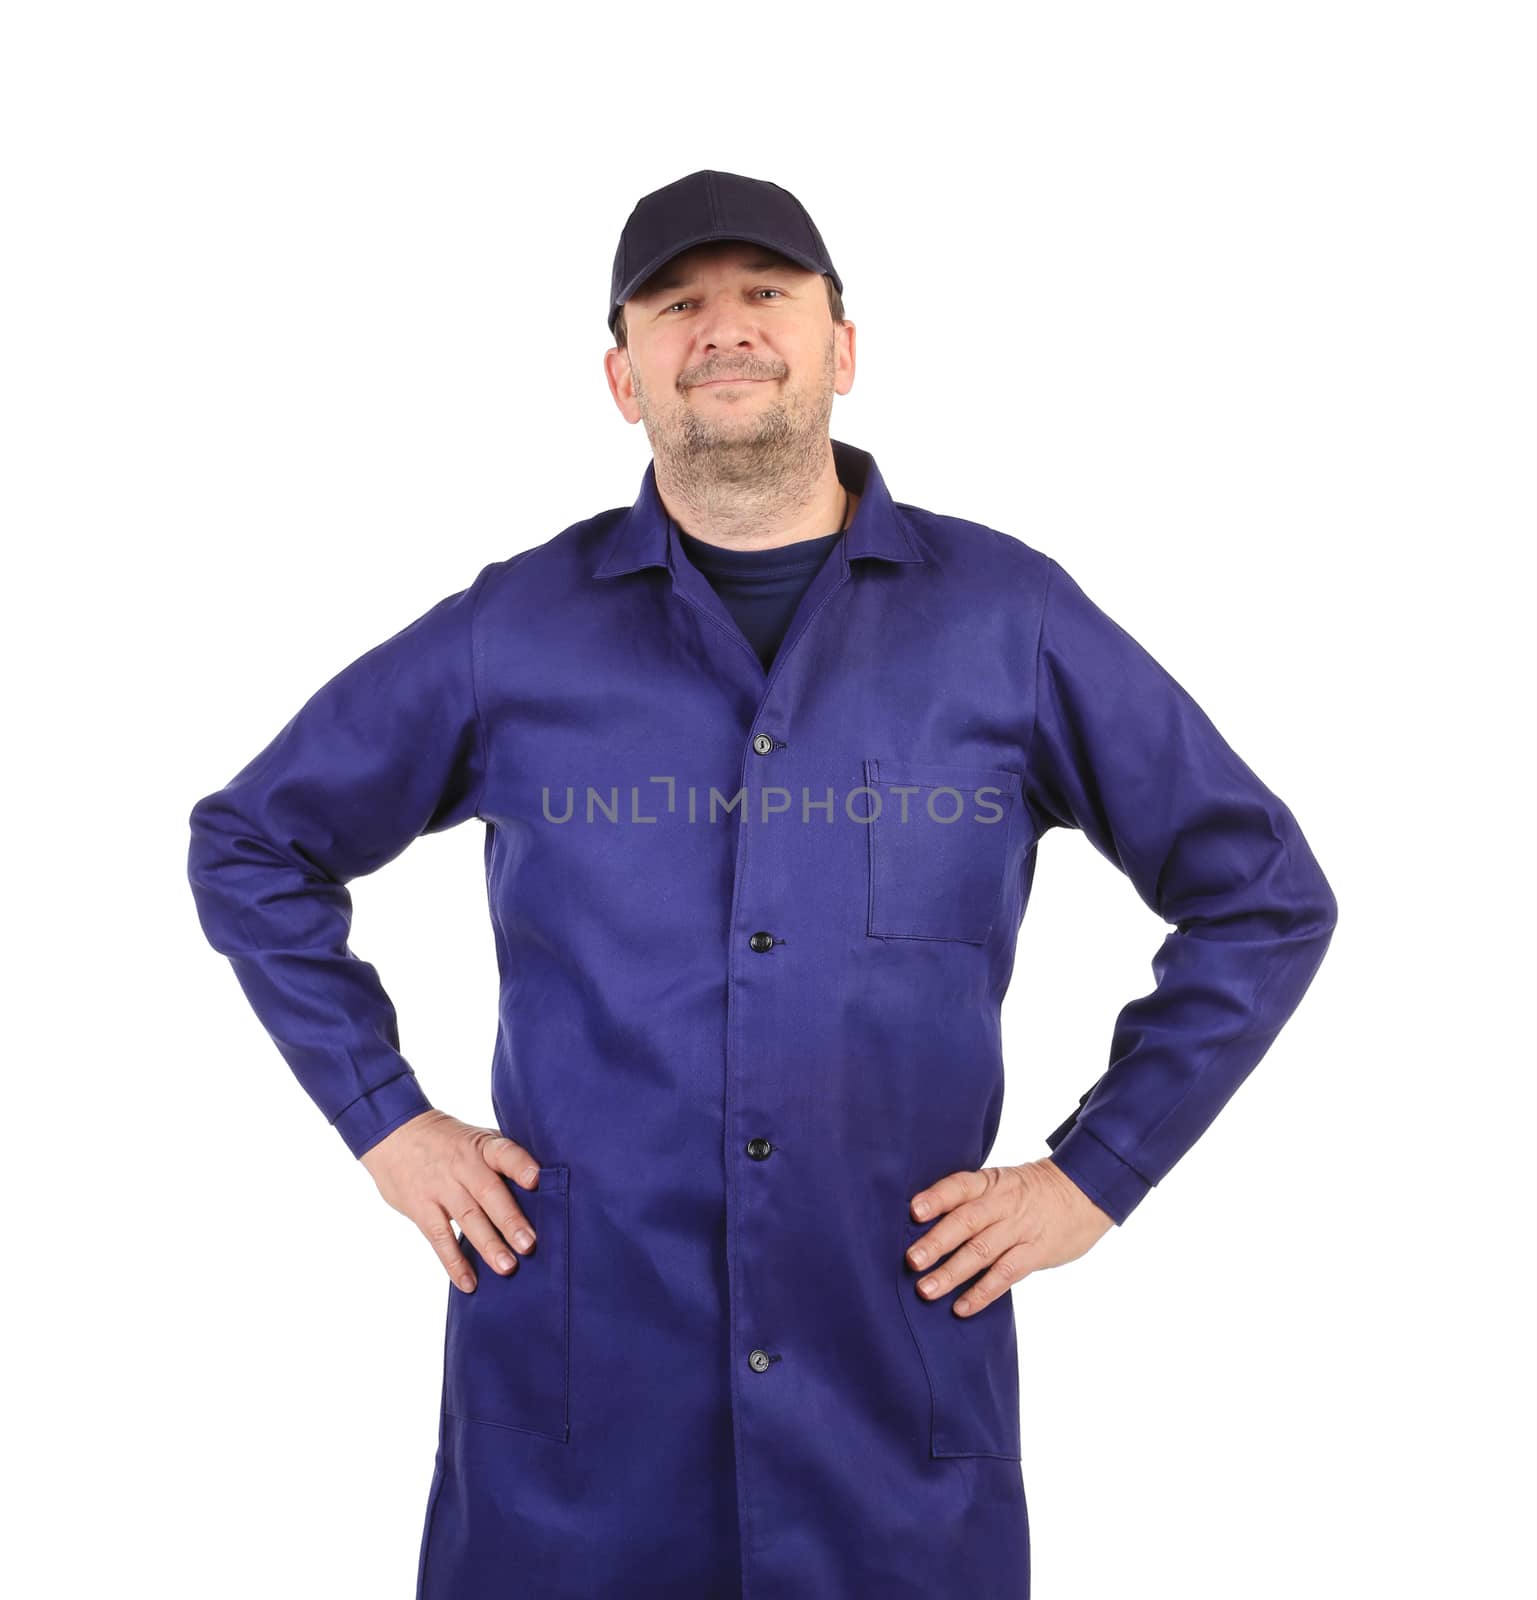 Worker holding arms on waist. Isolated on a white background.